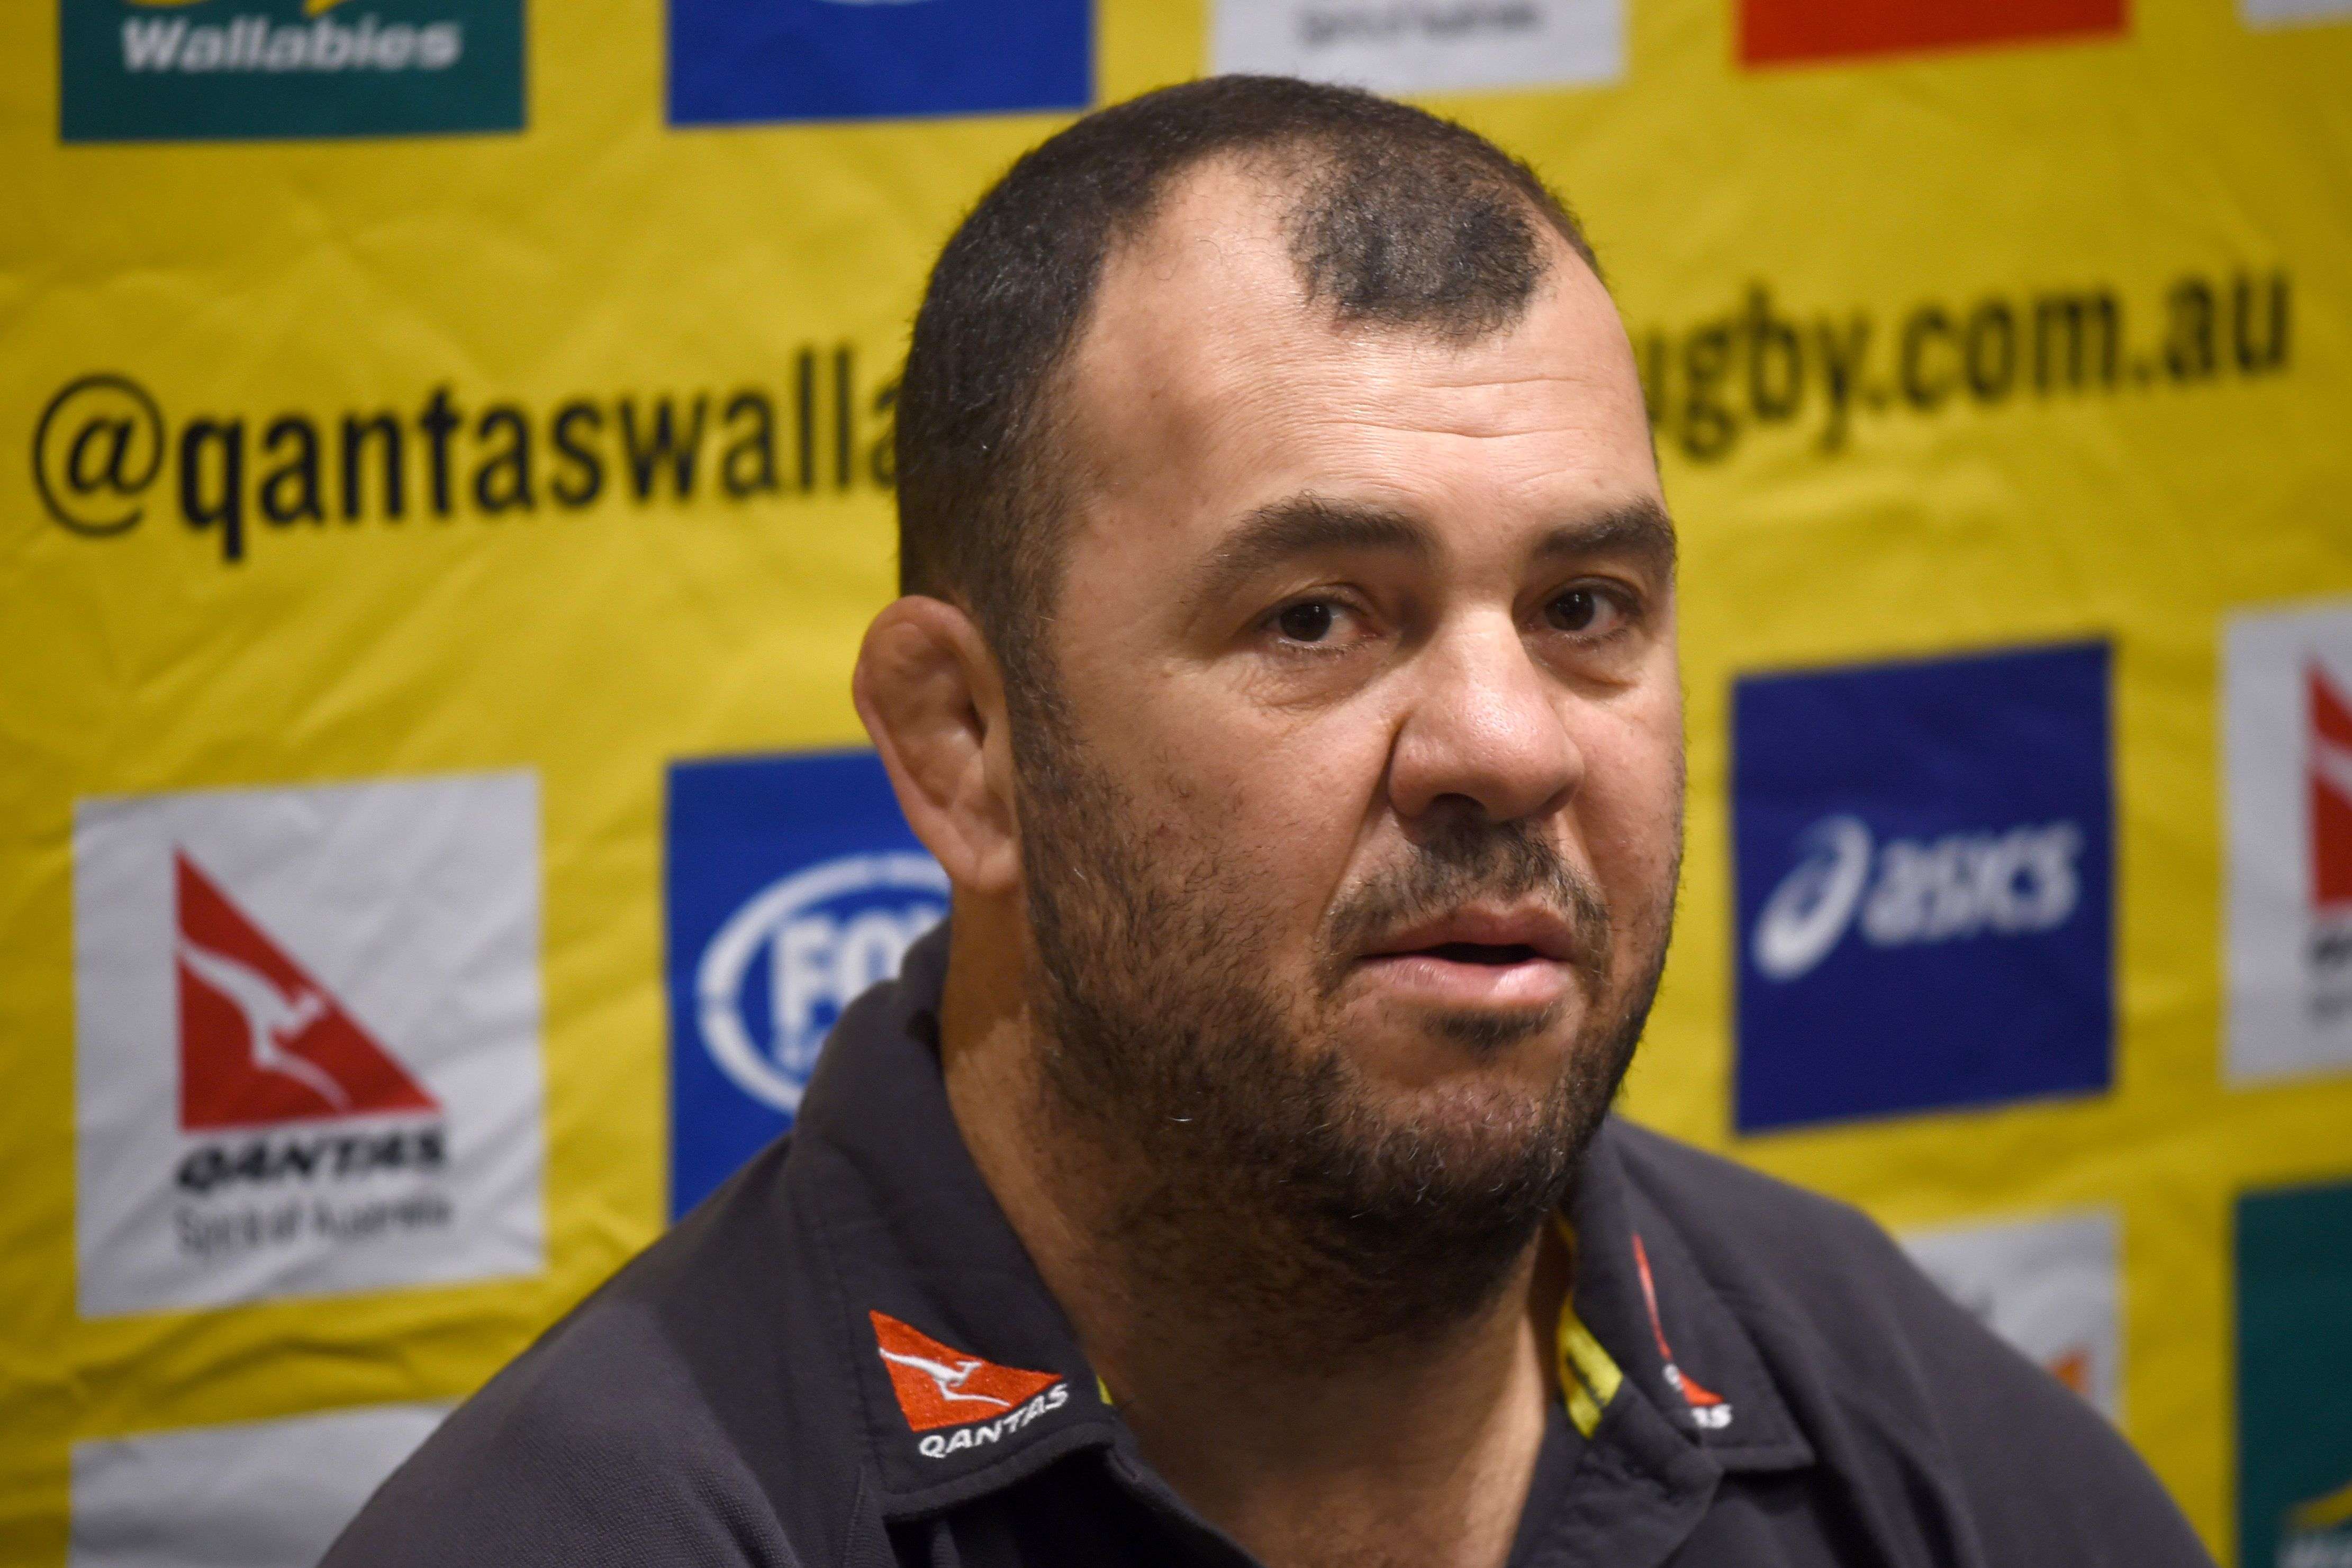 Australia coach Michael Cheika is not backing down from his post-match rant. Photo: AFP